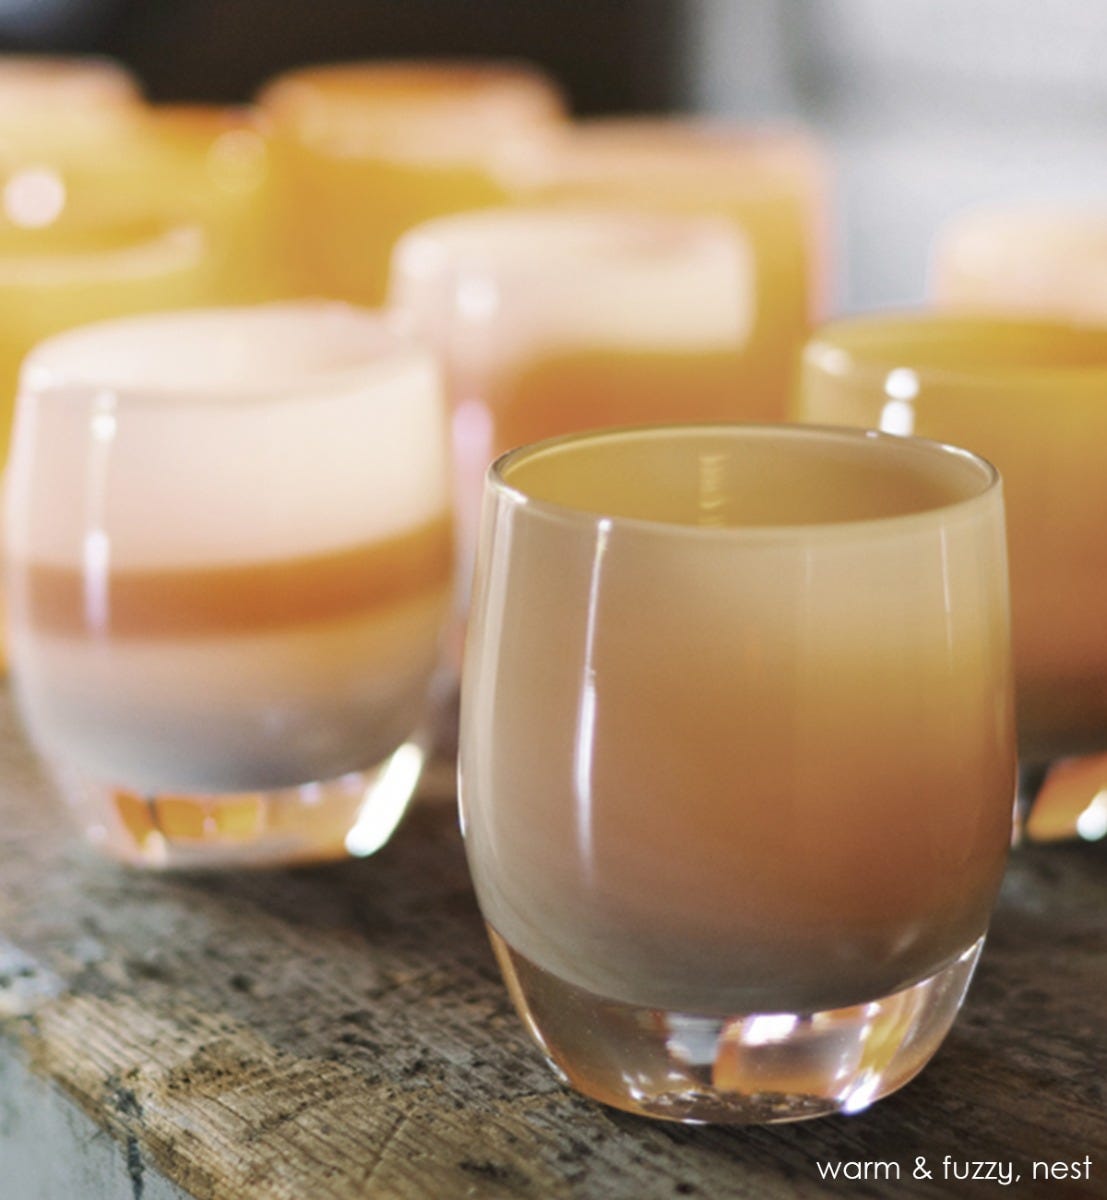 nest golden tan hand-blown glass votive candle holder. Paired with warm and fuzzy.